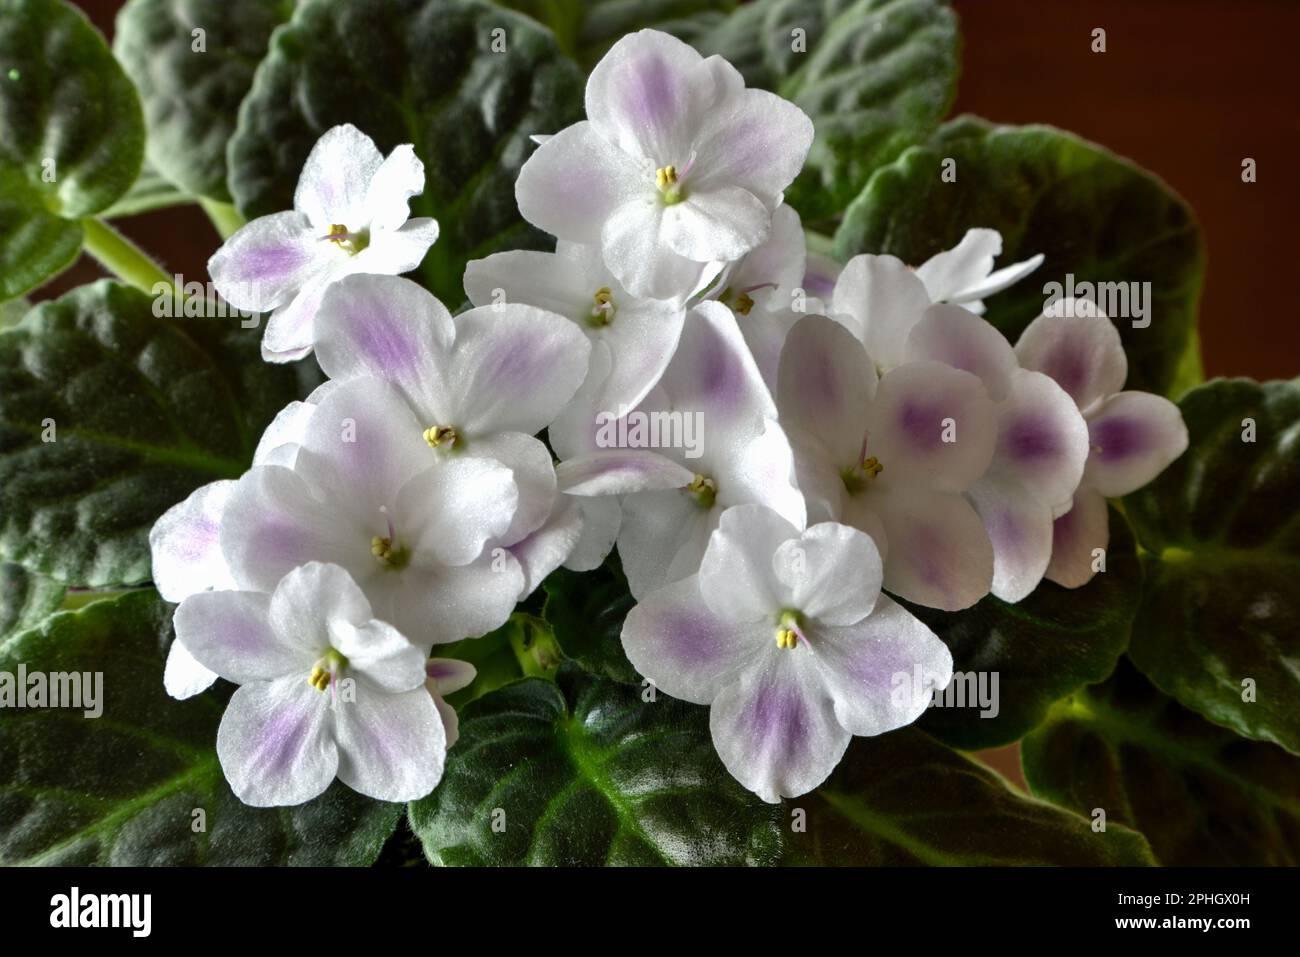 Delicate, beautiful African Violet blossoms. Stock Photo